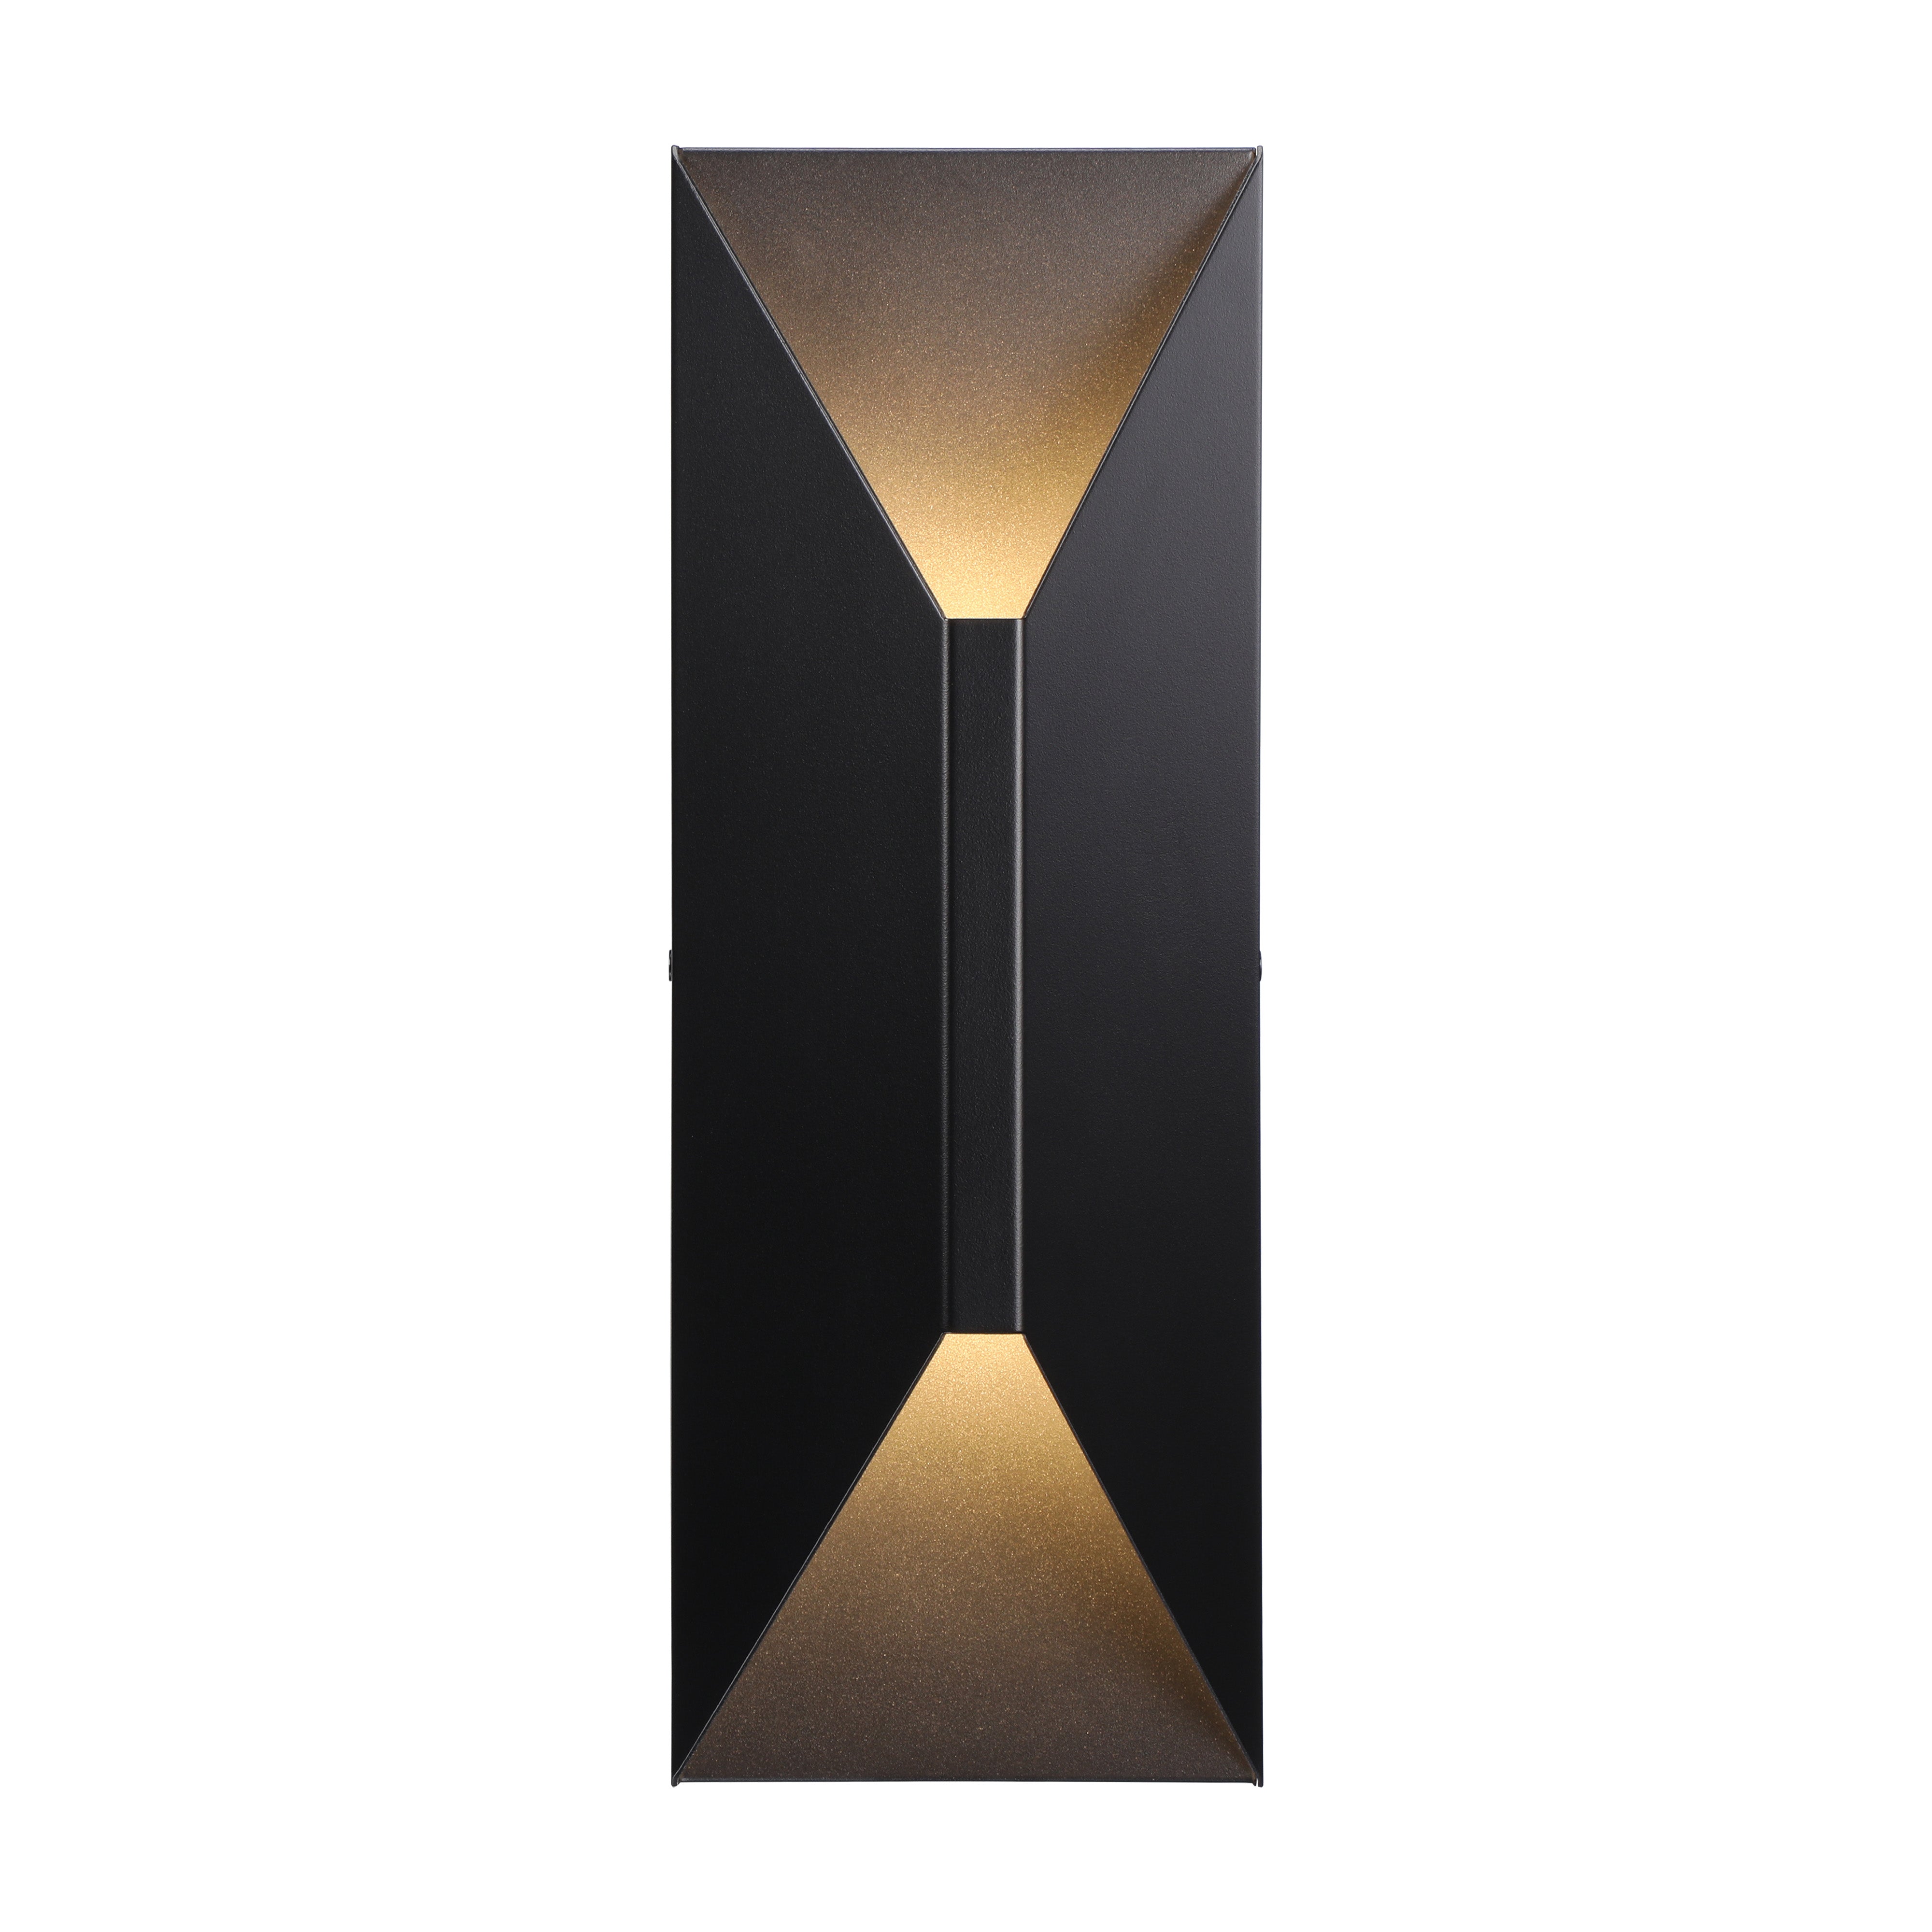 Mountains 14" Outdoor Wall Sconce